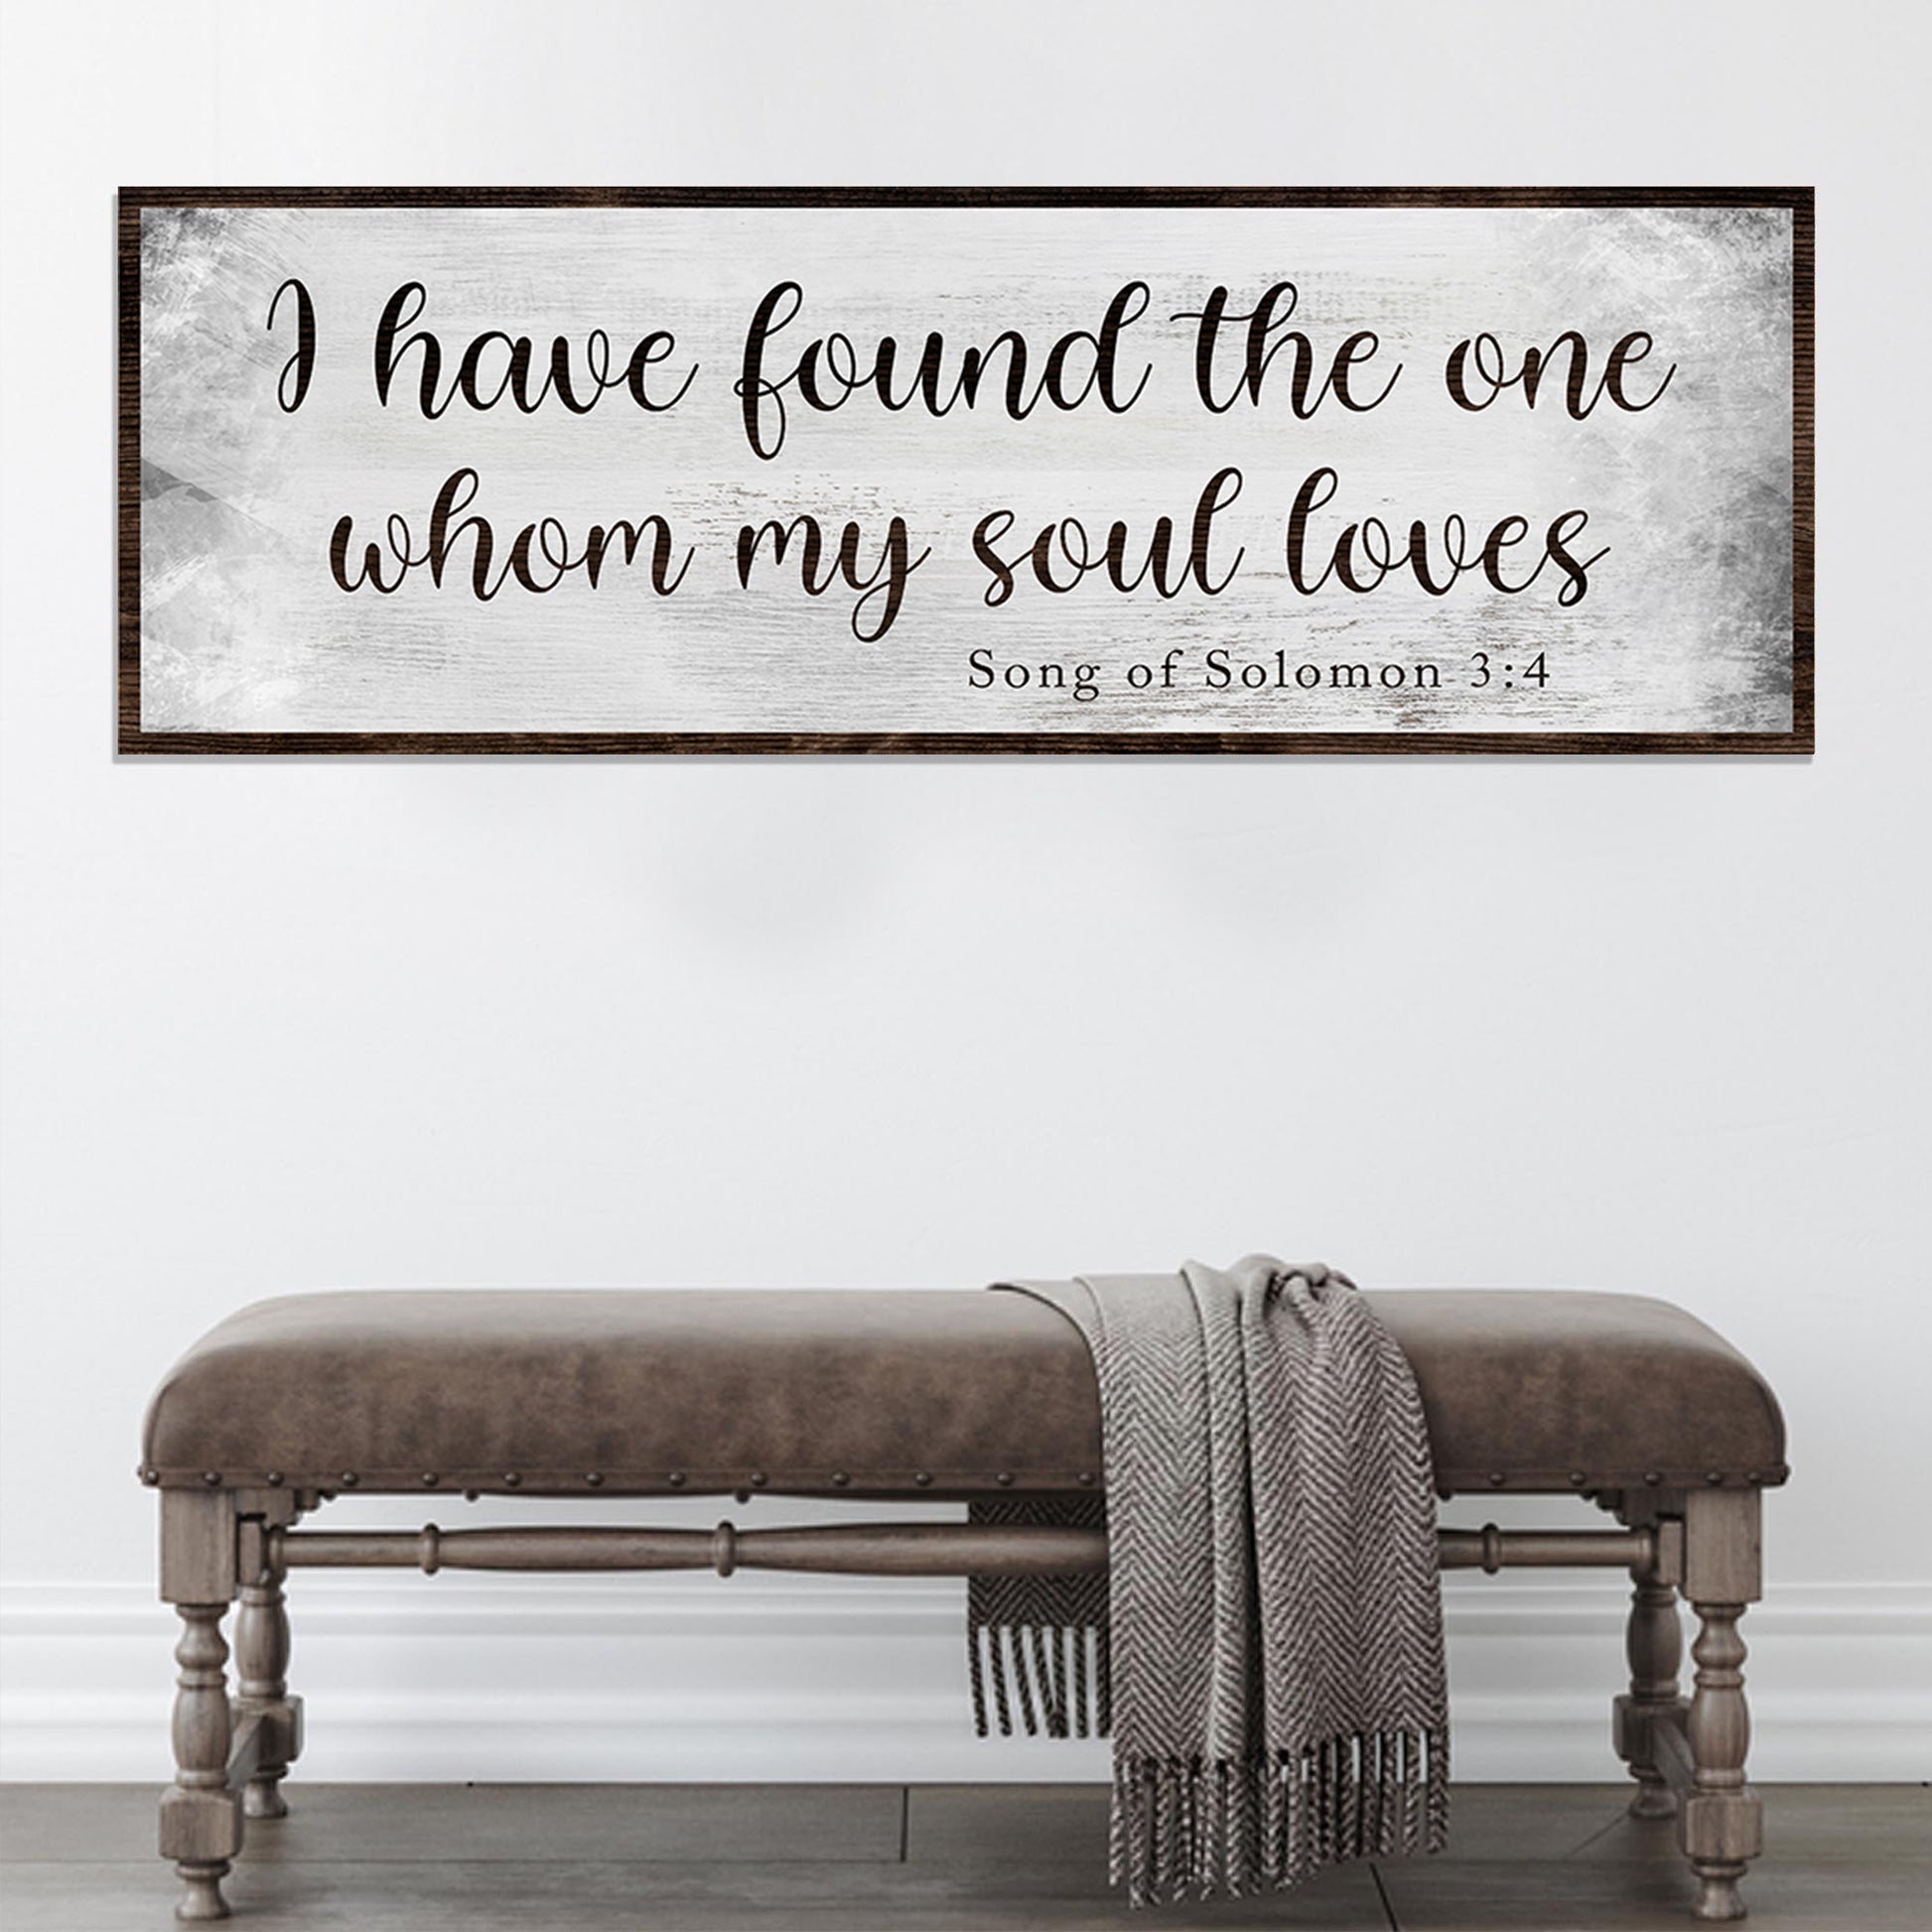 I Have Found The One whom my soul loves Sign Stye 1 - Image by Tailored Canvases